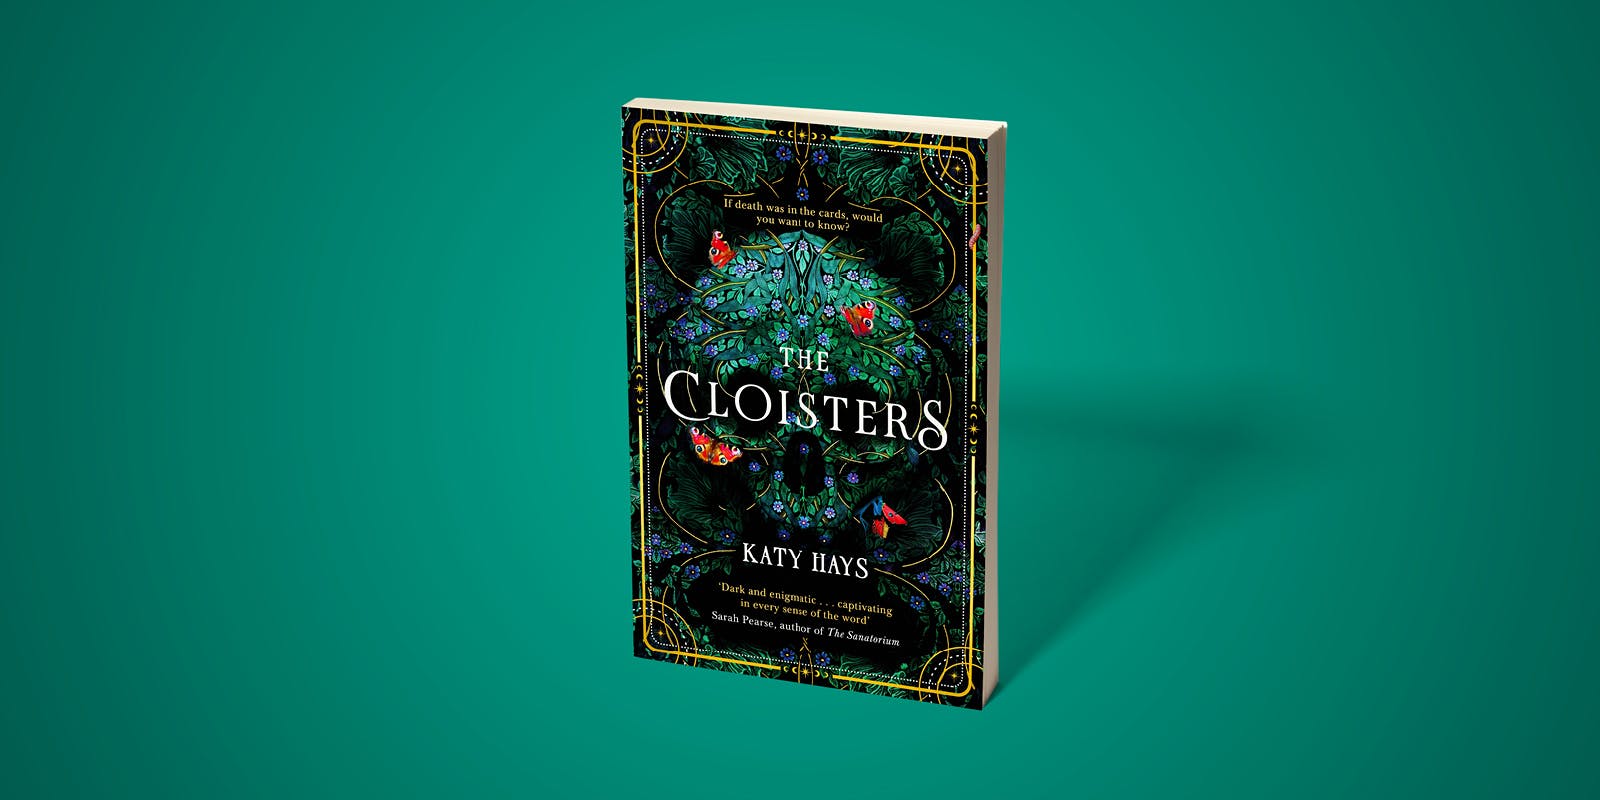 The Cloisters book club questions